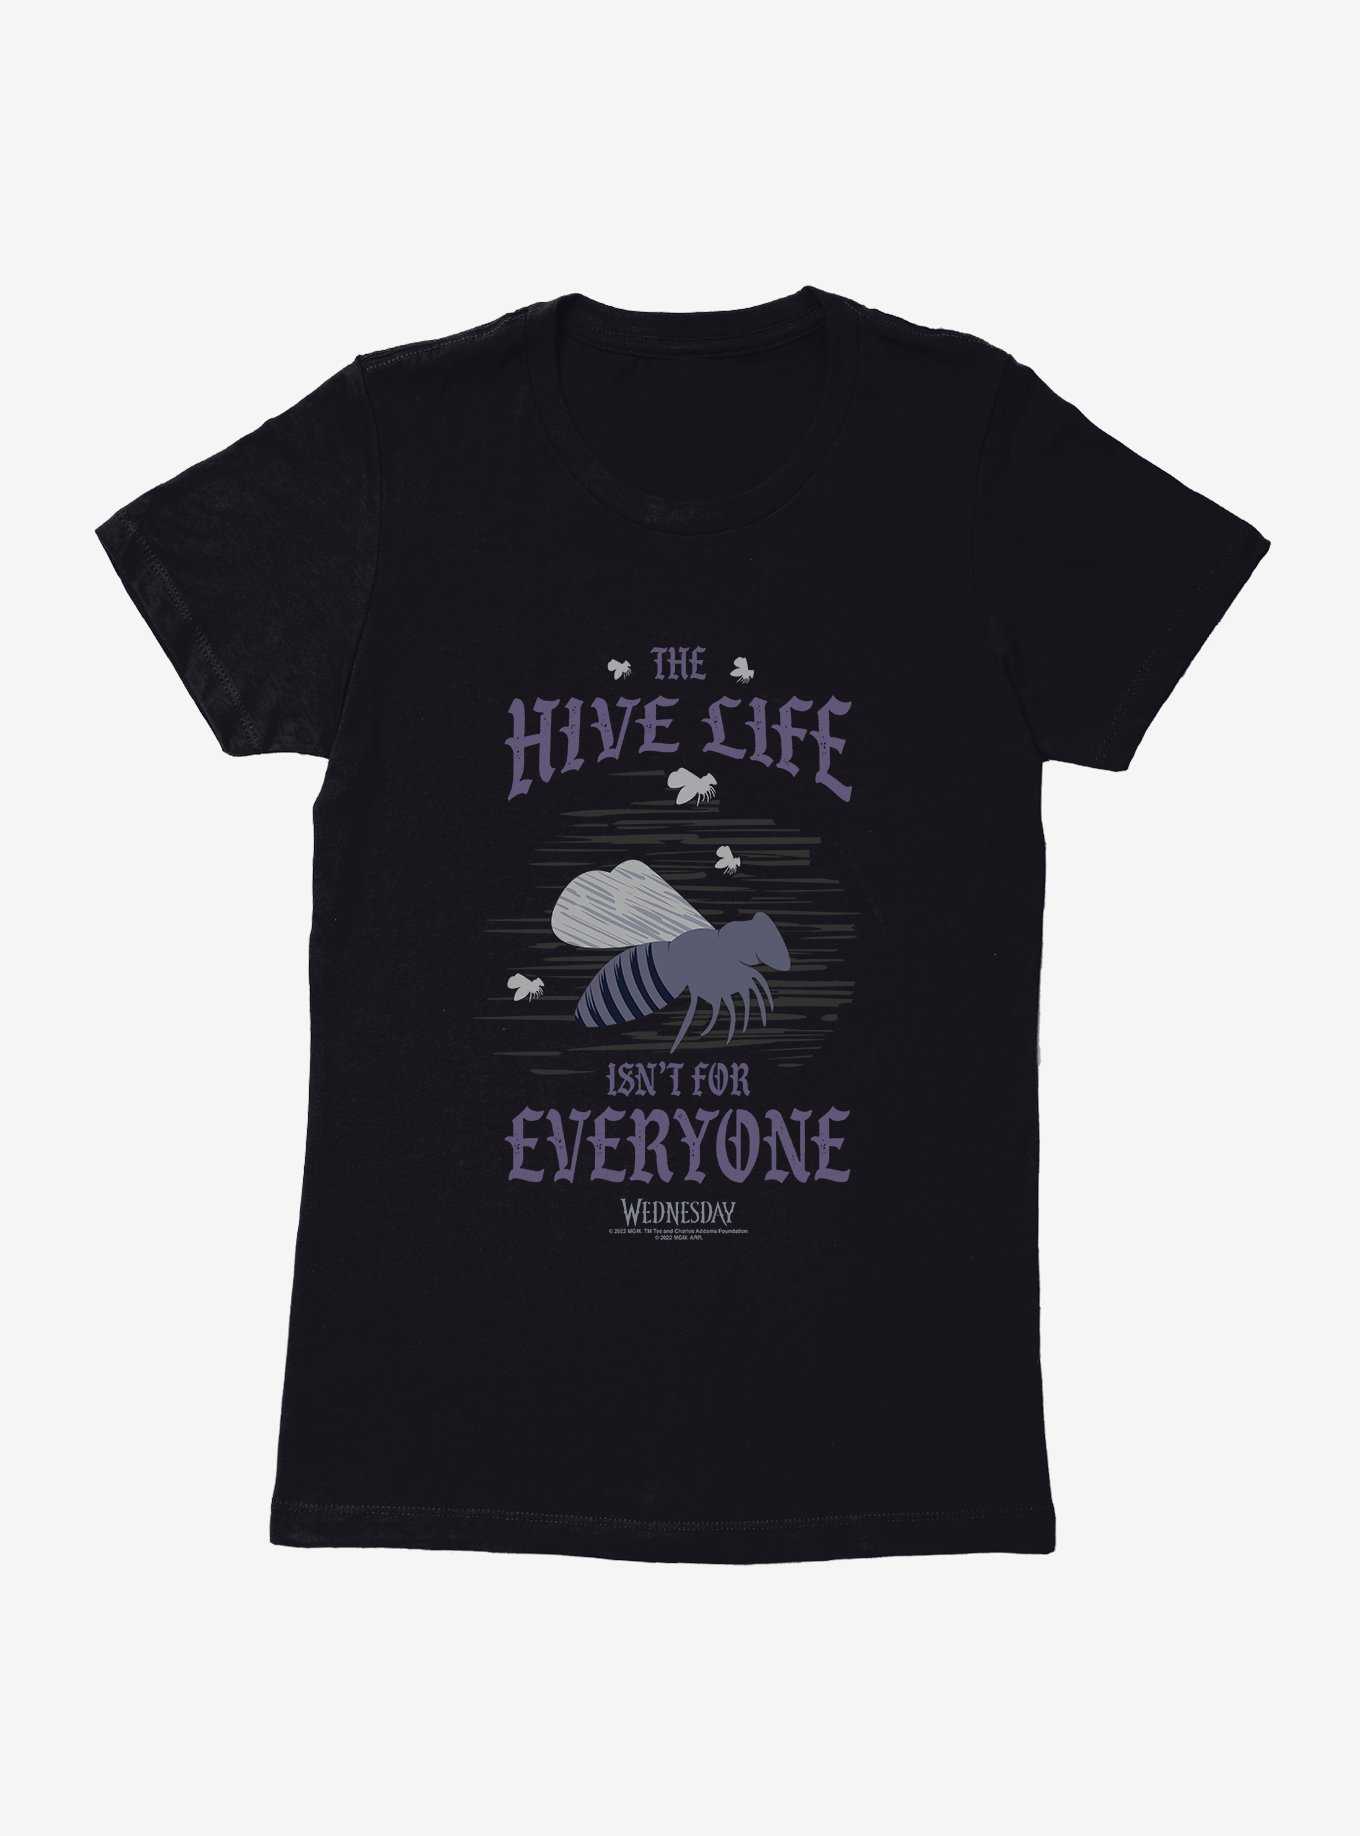 Wednesday The Hive Life Isn't For Everyone Womens T-Shirt, , hi-res